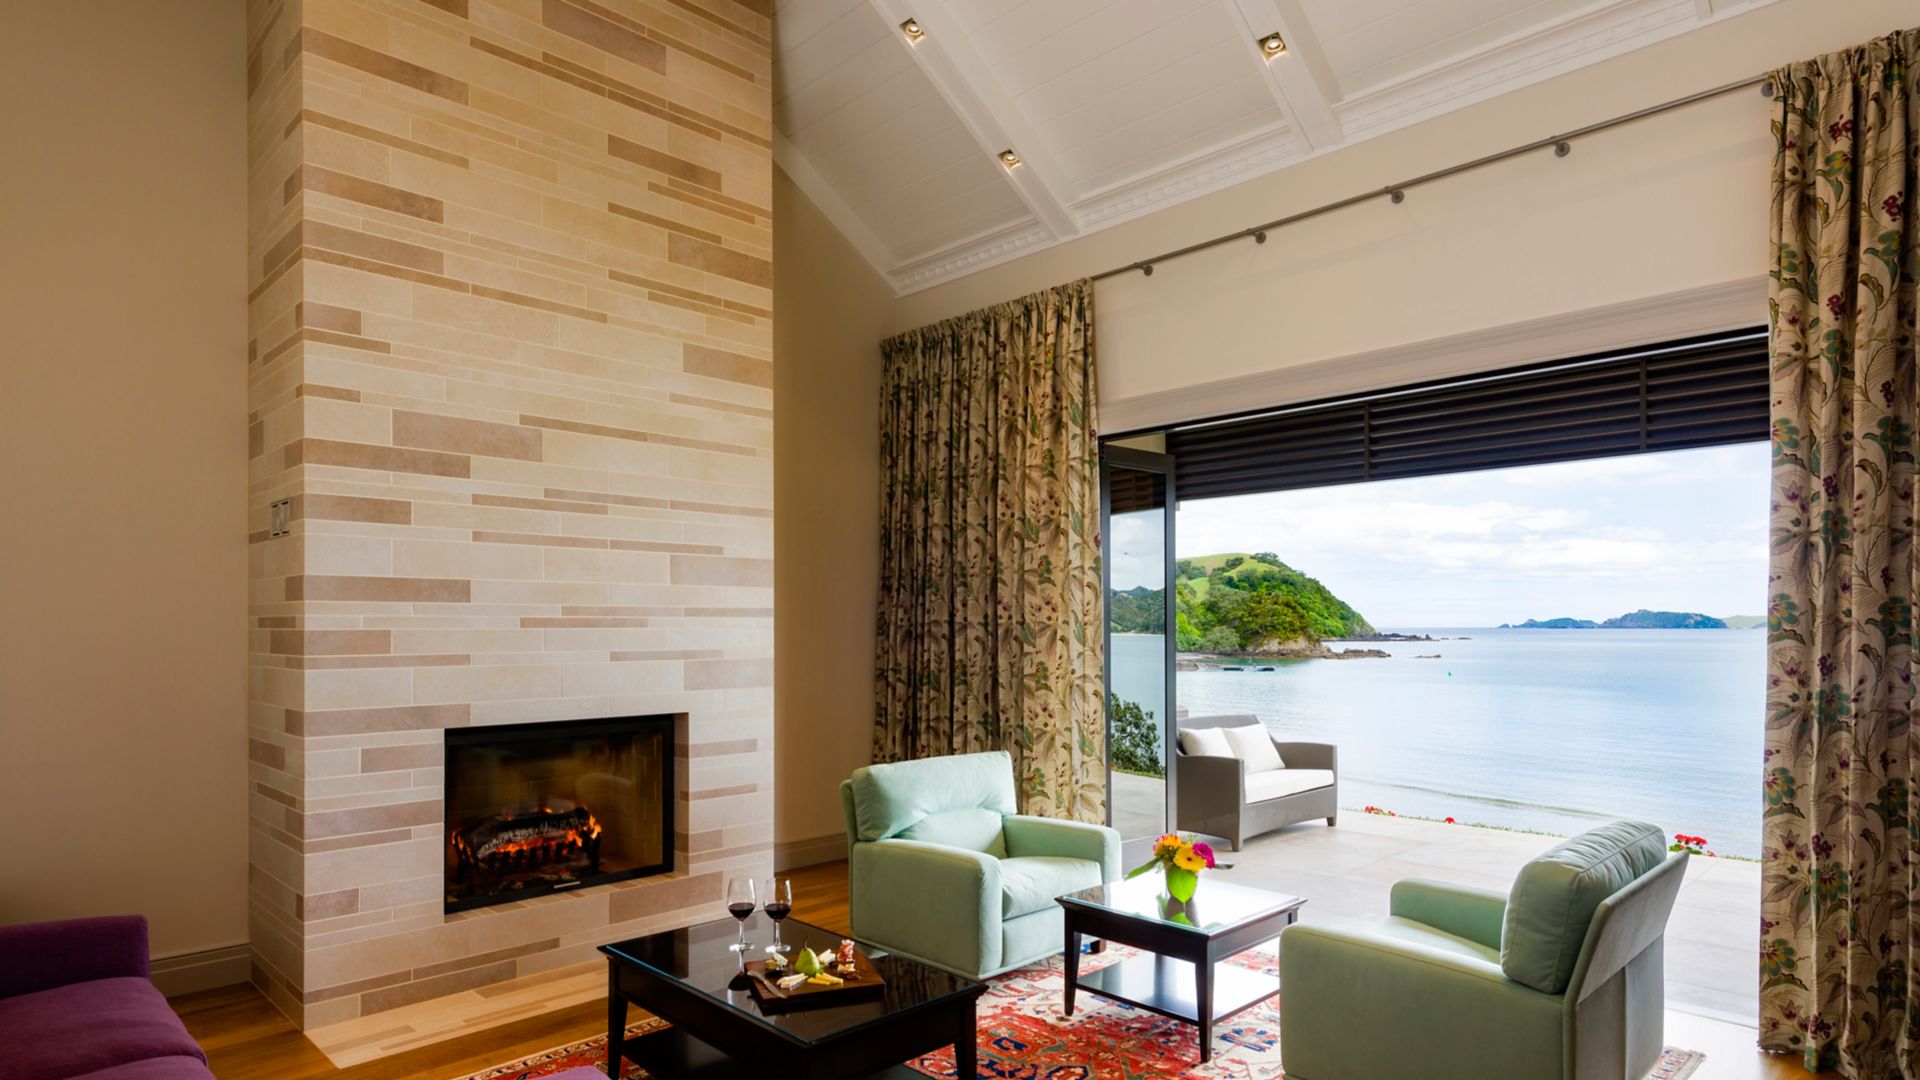 Room with chimney in luxury lodge in New Zealand